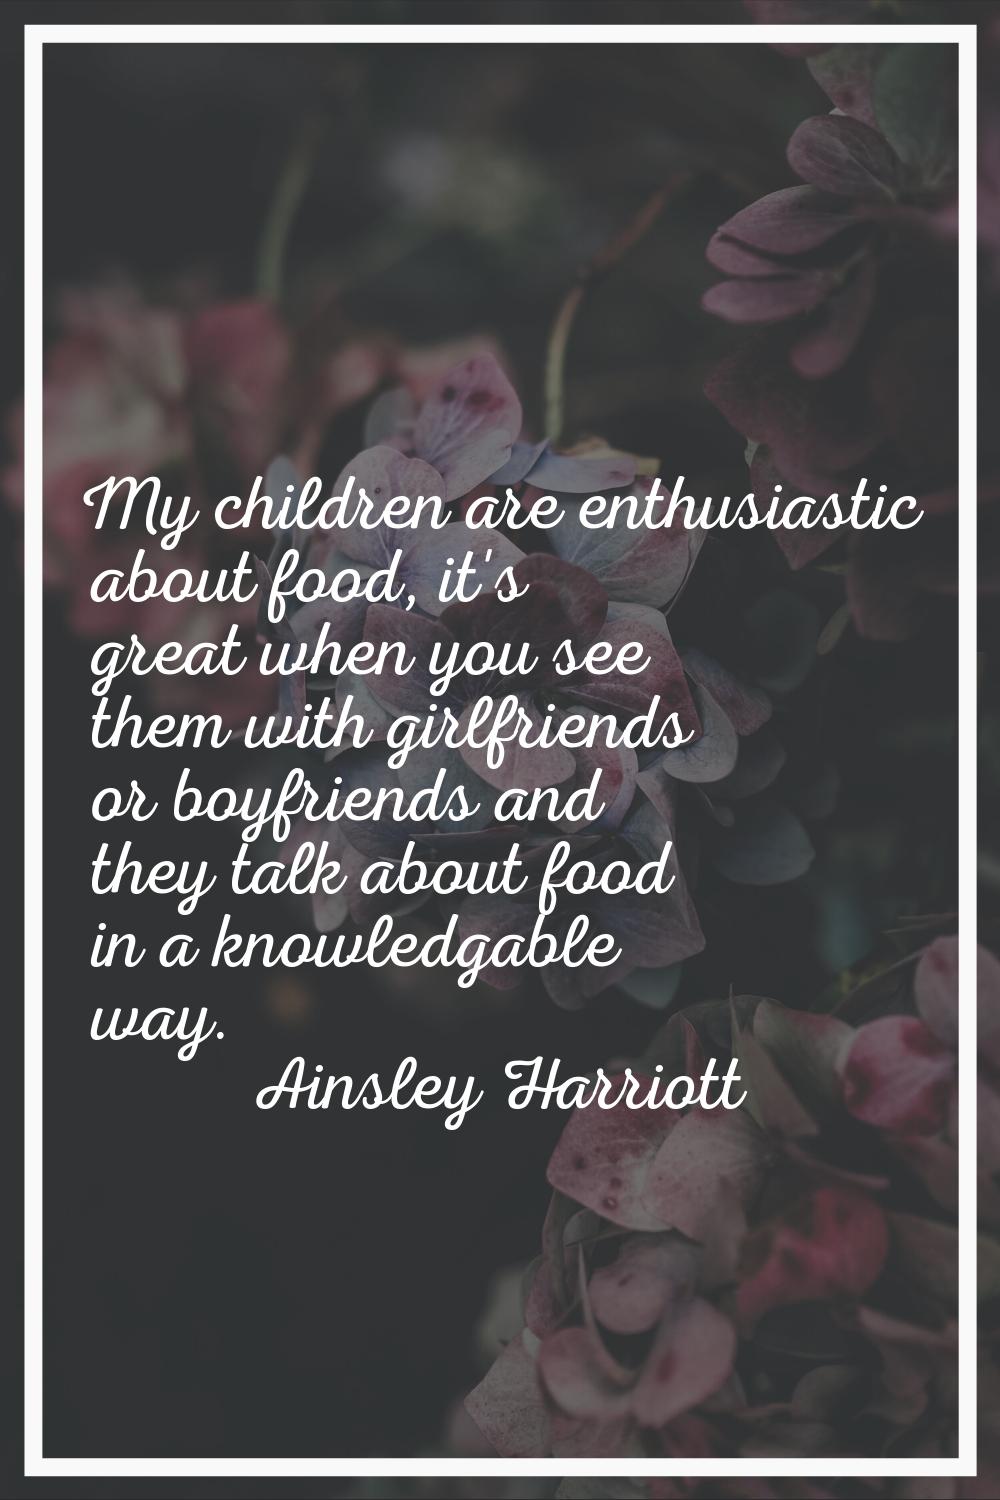 My children are enthusiastic about food, it's great when you see them with girlfriends or boyfriend